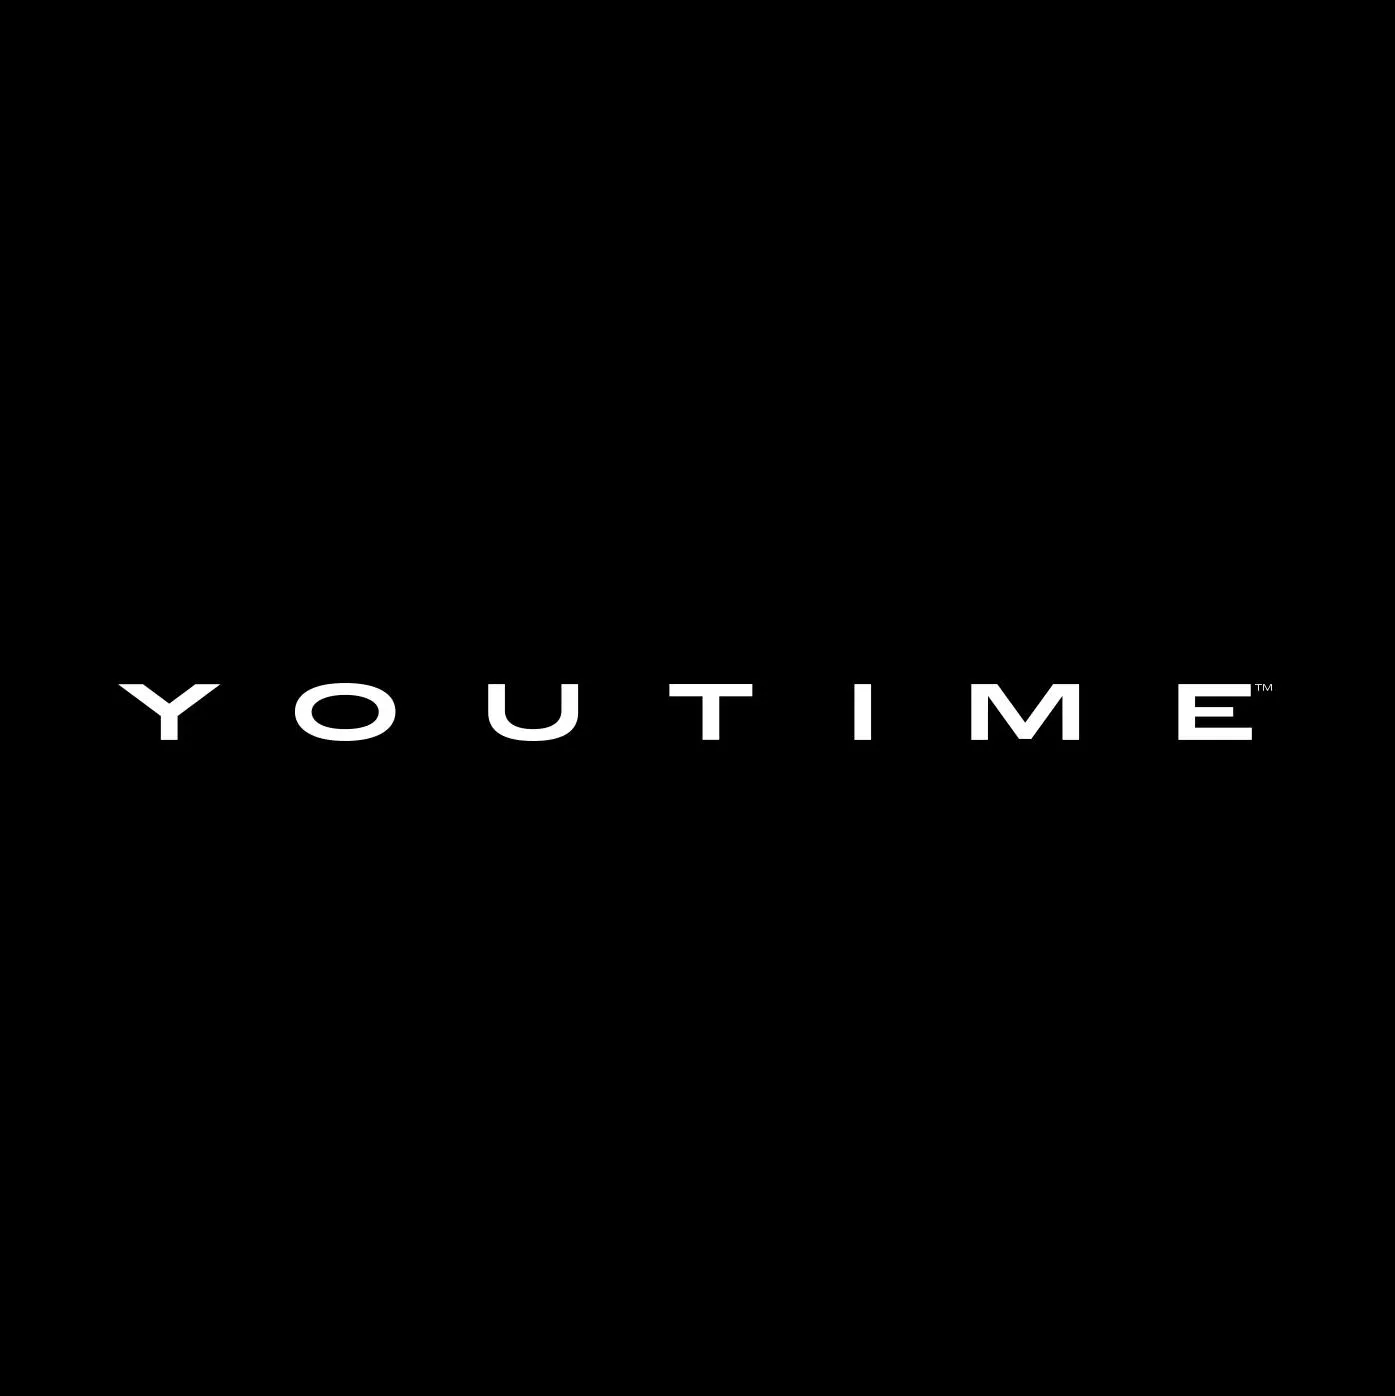 Youtime